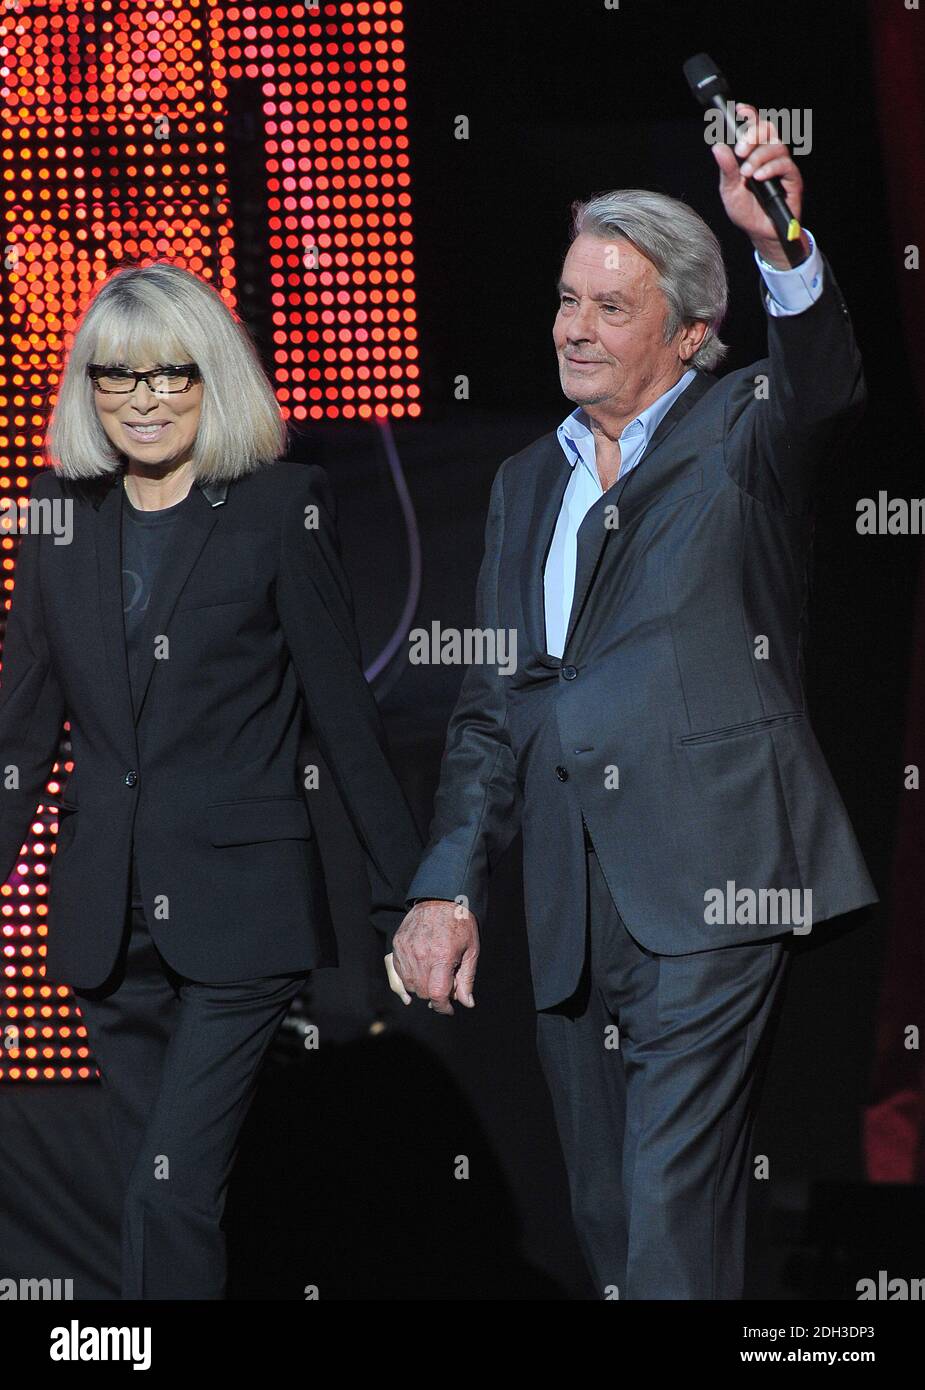 File photo - Alain Delon and Mireille Darc appearing on France 3's TV show 300 Choeurs Pour La Vie in La Plaine St-Denis, near Paris, France on September 24, 2012. Darc died at 79 it was announced today. She was Alain Delon's longtime co-star and companion. She appeared as a lead character in Jean-Luc Godard's 1967 film Week End. Photo by Giancarlo Gorassini/ABACAPRESS.COM Stock Photo